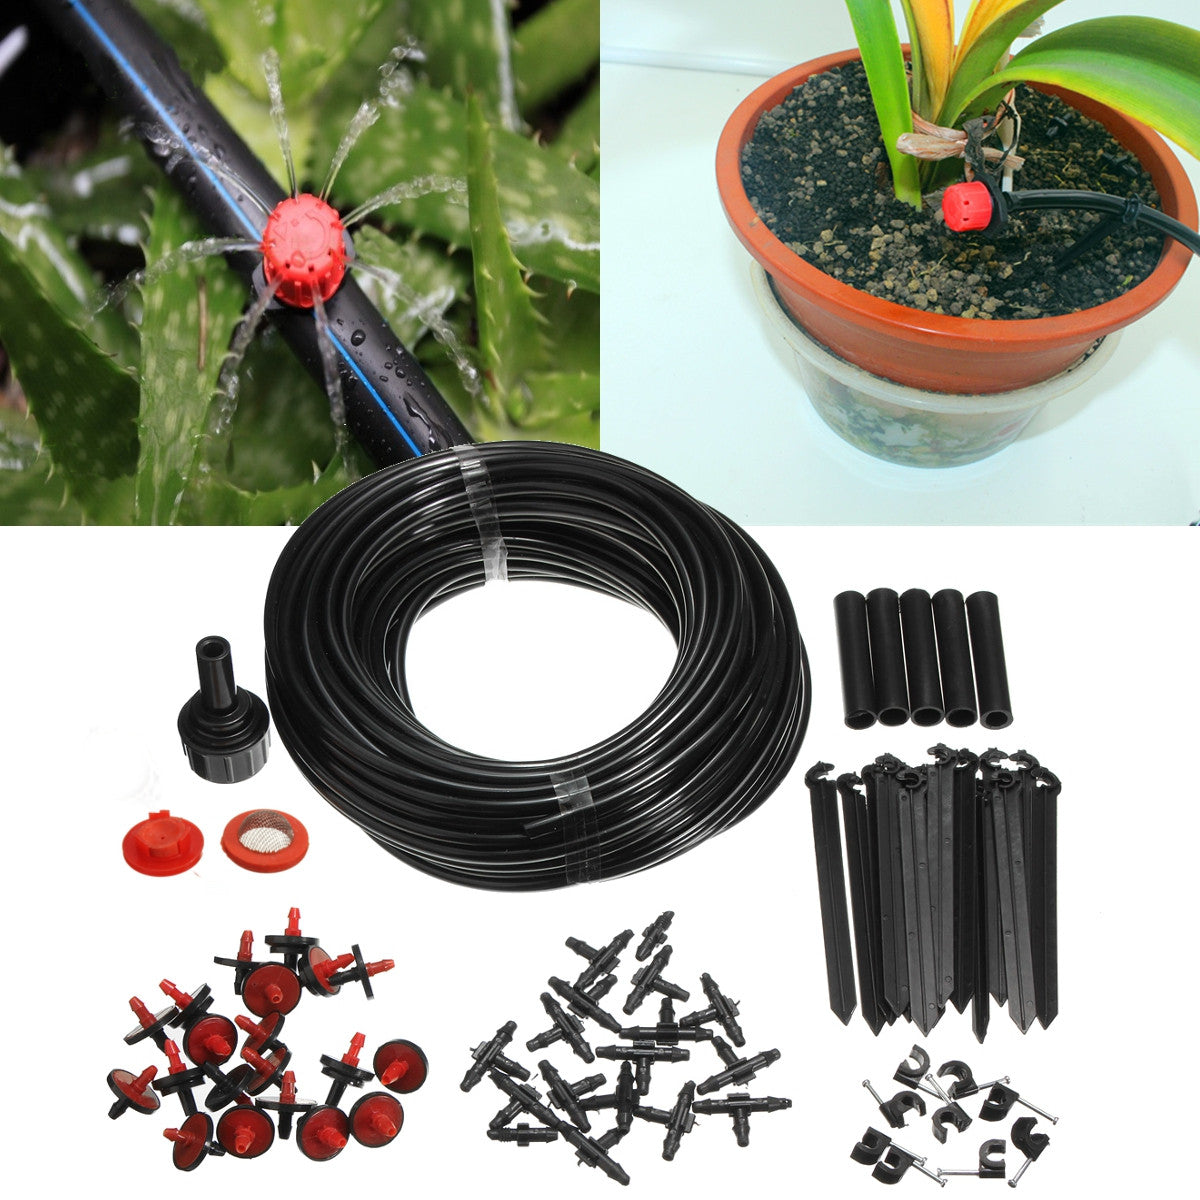 23m Micro Drip Irrigation System Plant Self Watering Garden Hose Kits Drippers